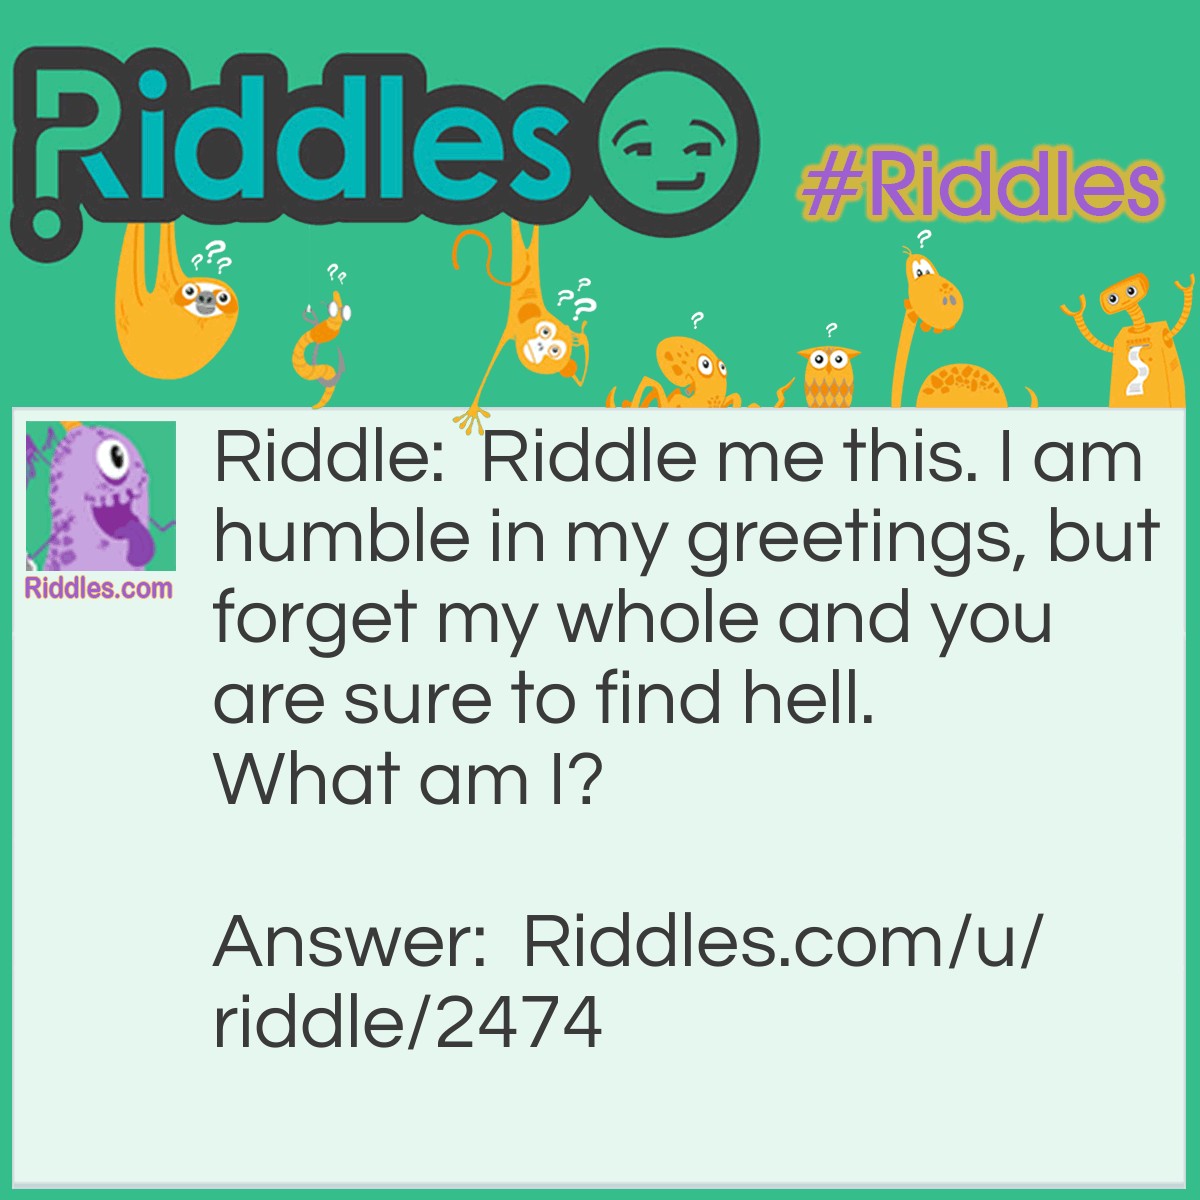 Riddle: <a href="/2850">Riddle me this</a>. I am humble in my greetings, but forget my whole and you are sure to find hell. What am I? Answer: Hello.